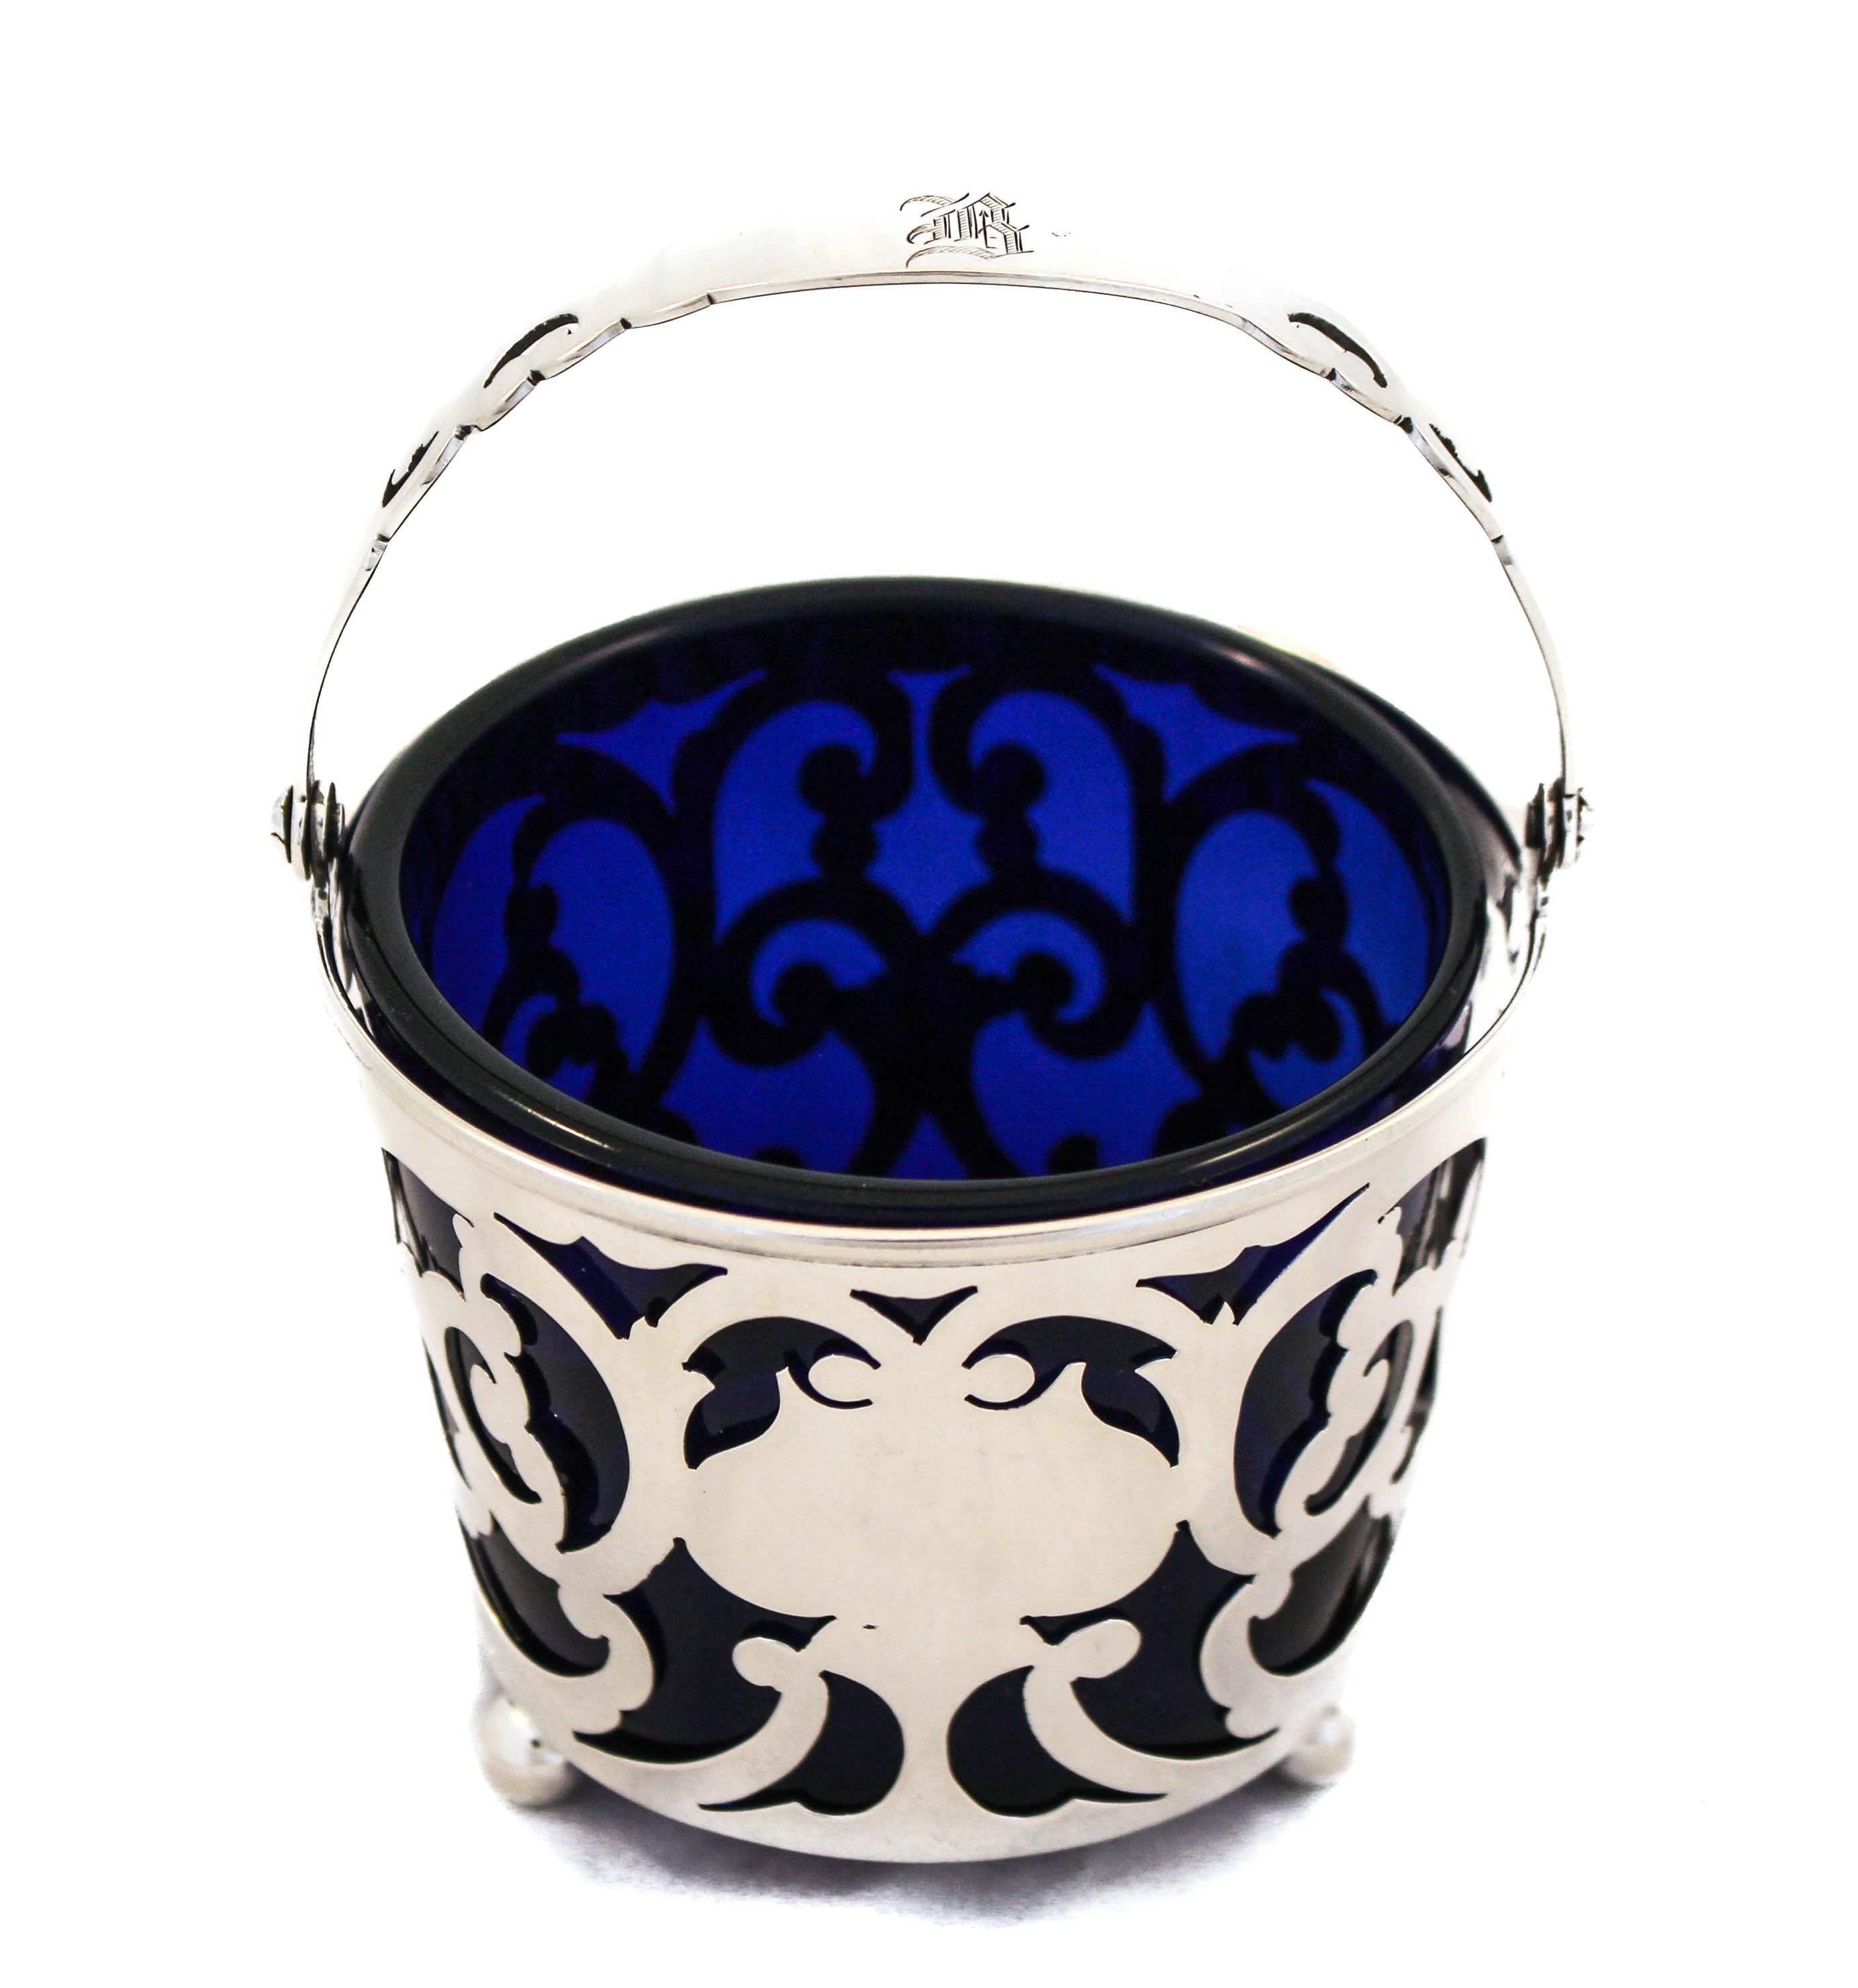 This lovely sterling silver bonbonniere is being offered. Standing on three balls, the entire body is a cutout design. Through the sterling silver the rich blue liner pops out. The handle folds down which makes storing easy. The glass liner comes